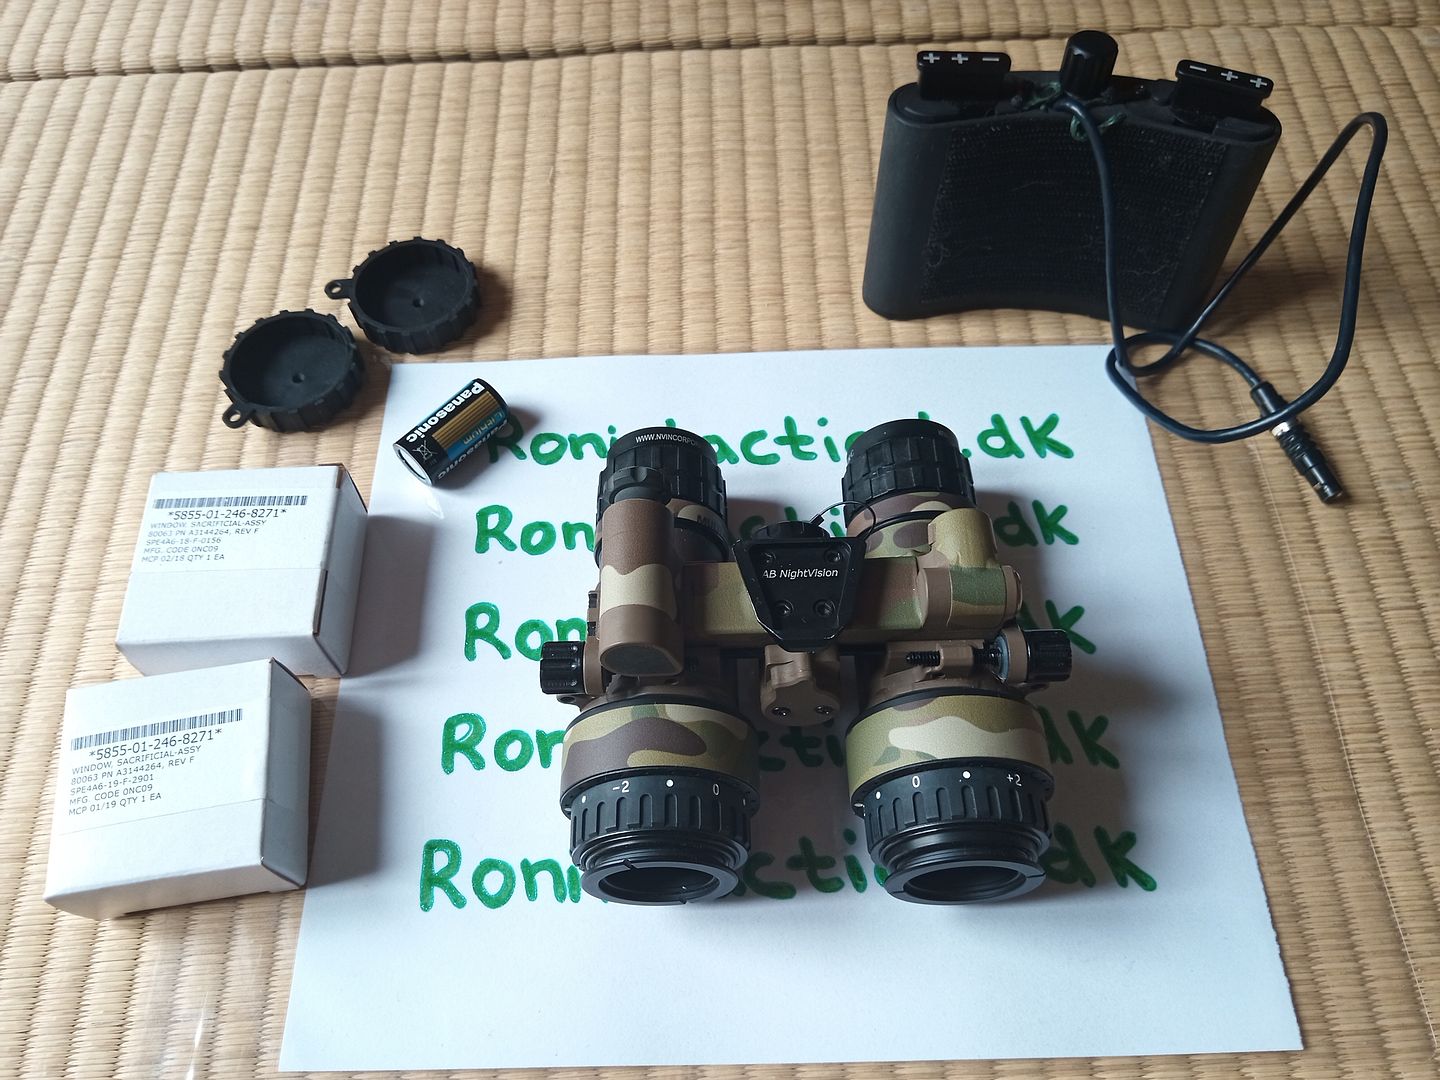 RNVG_Ruggedized_Night_Vision_Goggles_TAN-FDE_with_MULTICAM_Nocorium_RNVG_Wrap_(3)